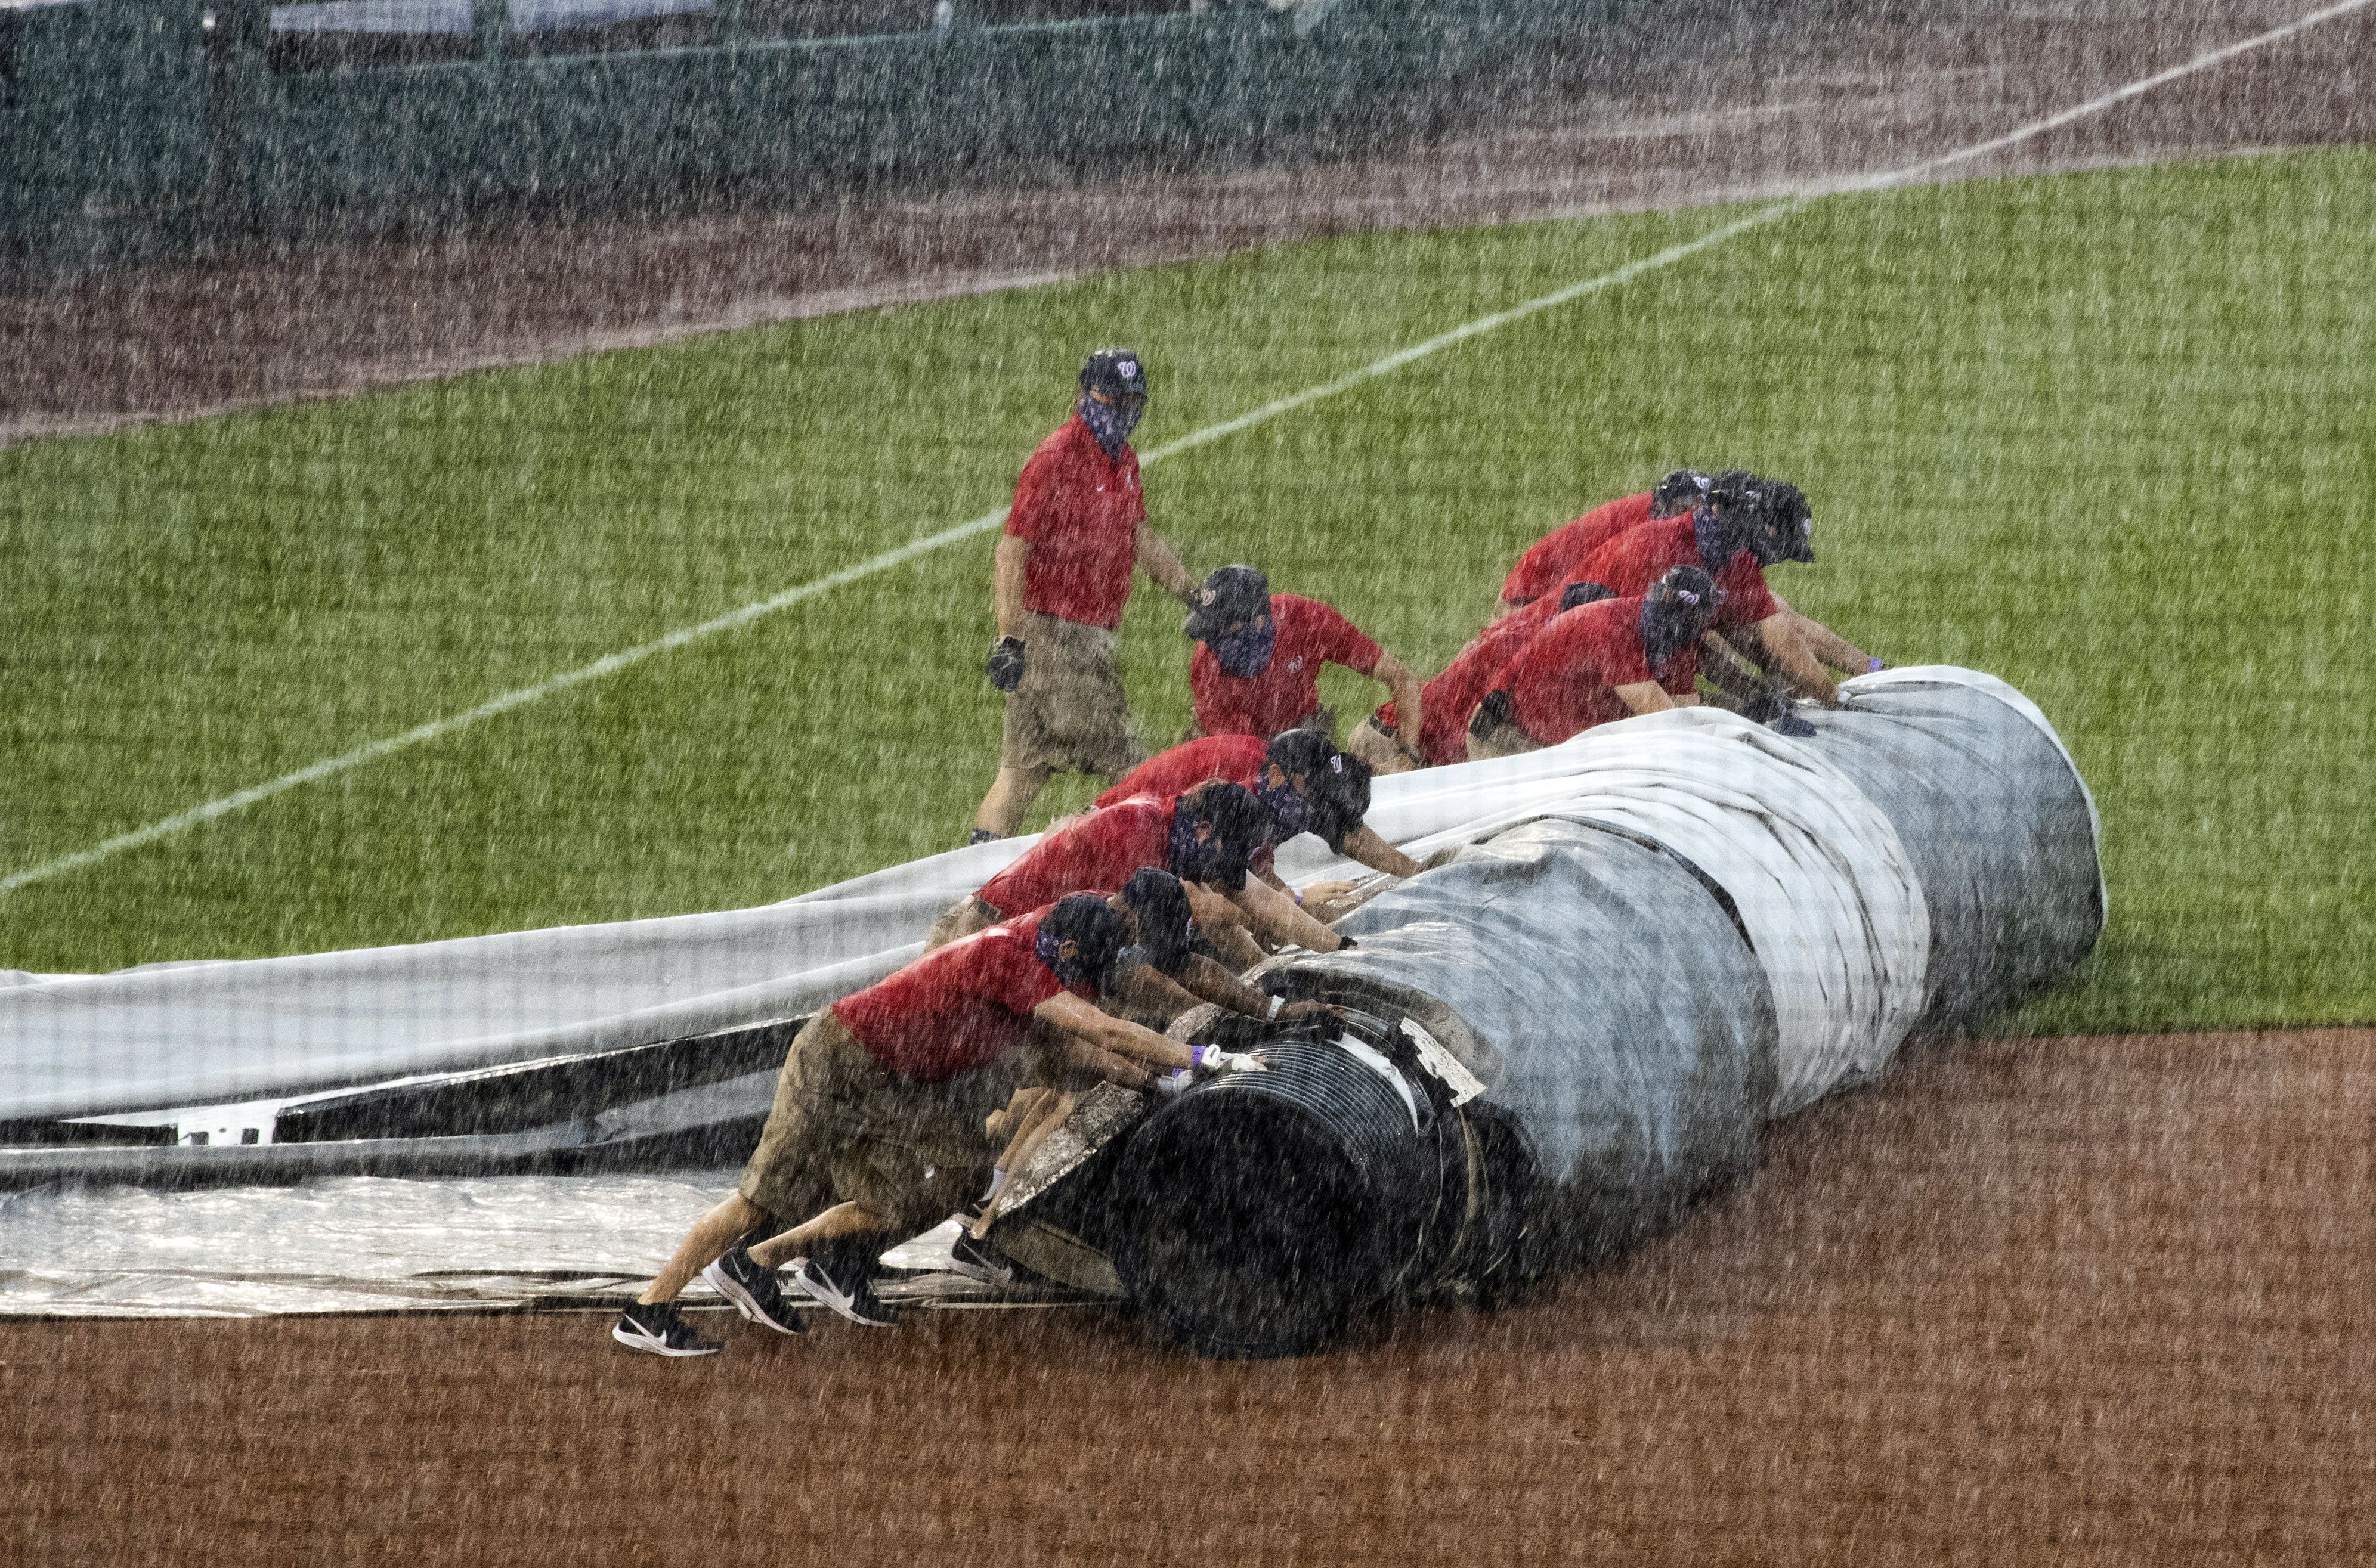 Strasburg's debut shaky; O's-Nats suspended by tarp issues